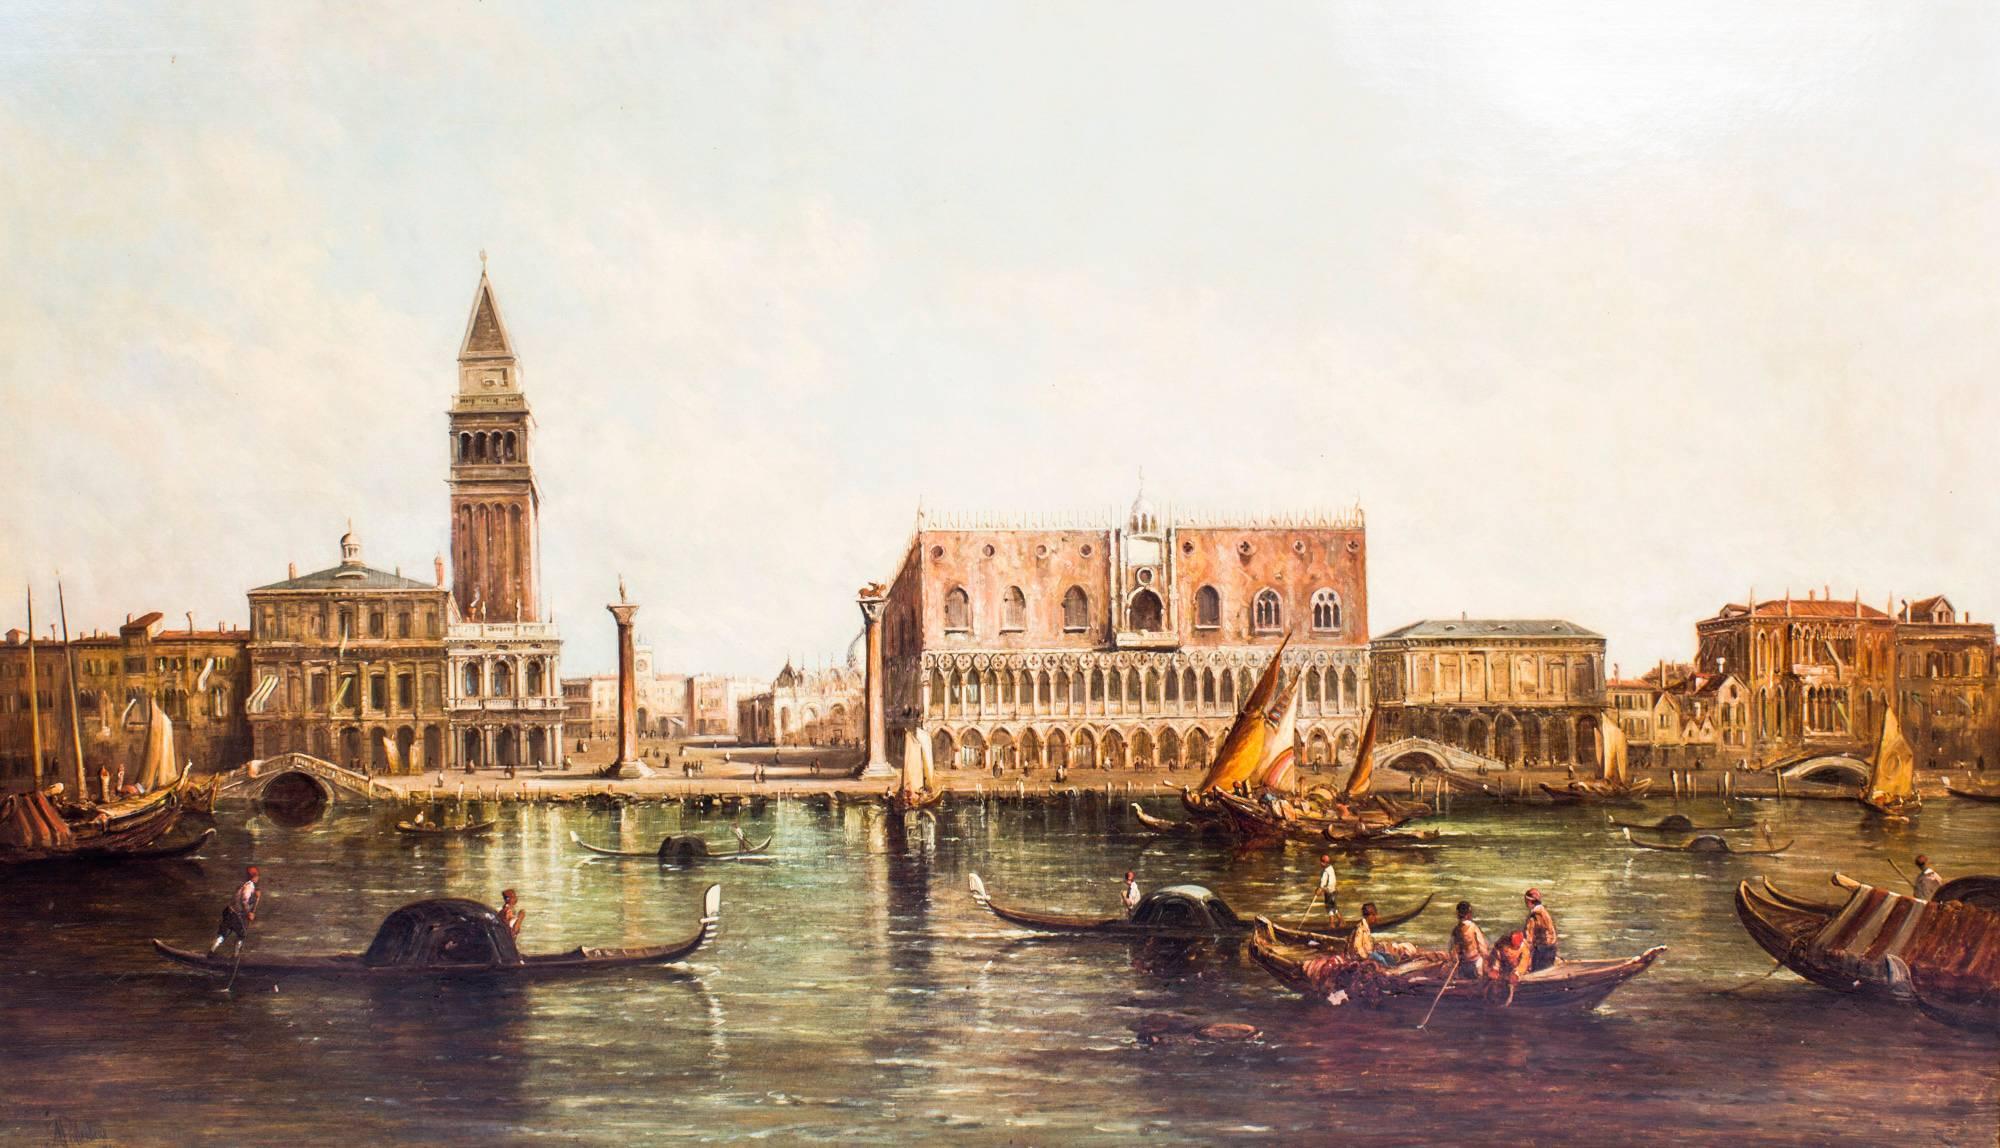 This is a beautiful oil on canvas painting of the Doge's Palace and St Mark's Square from the Grand Canal, Venice by the renowned British artist Alfred Pollentine (1836-1890) and signed dated '74 on lower left.

This beautiful waterscape captures a